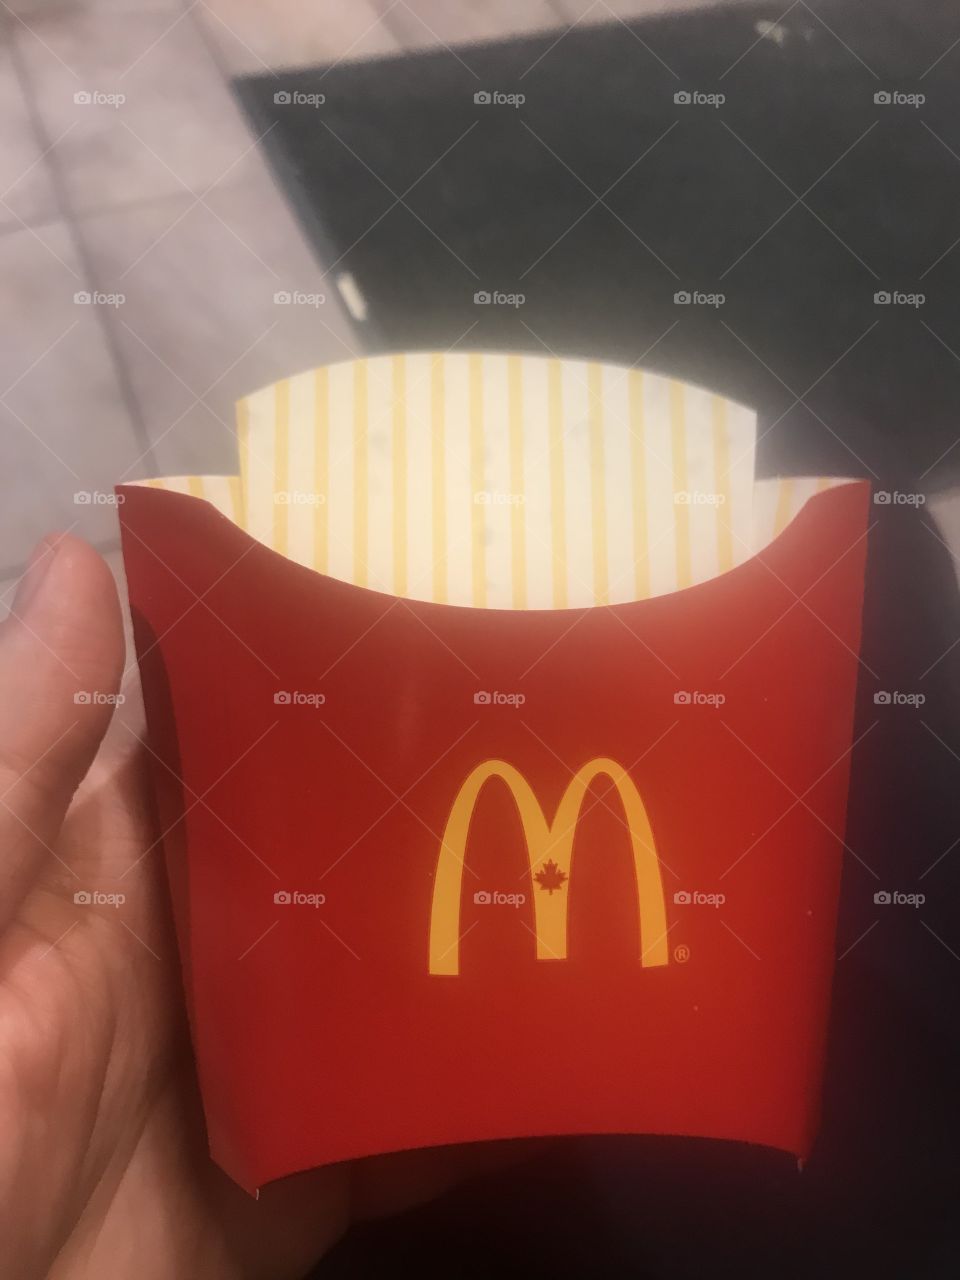 Photo of a McDonalds cup for French fries. It also features the classic M symbol. Great stock photo to use in any news stories about the McDonald’s brand, French fries, the 1$ coffee special and its’ impact on sales in the company re shareholders 